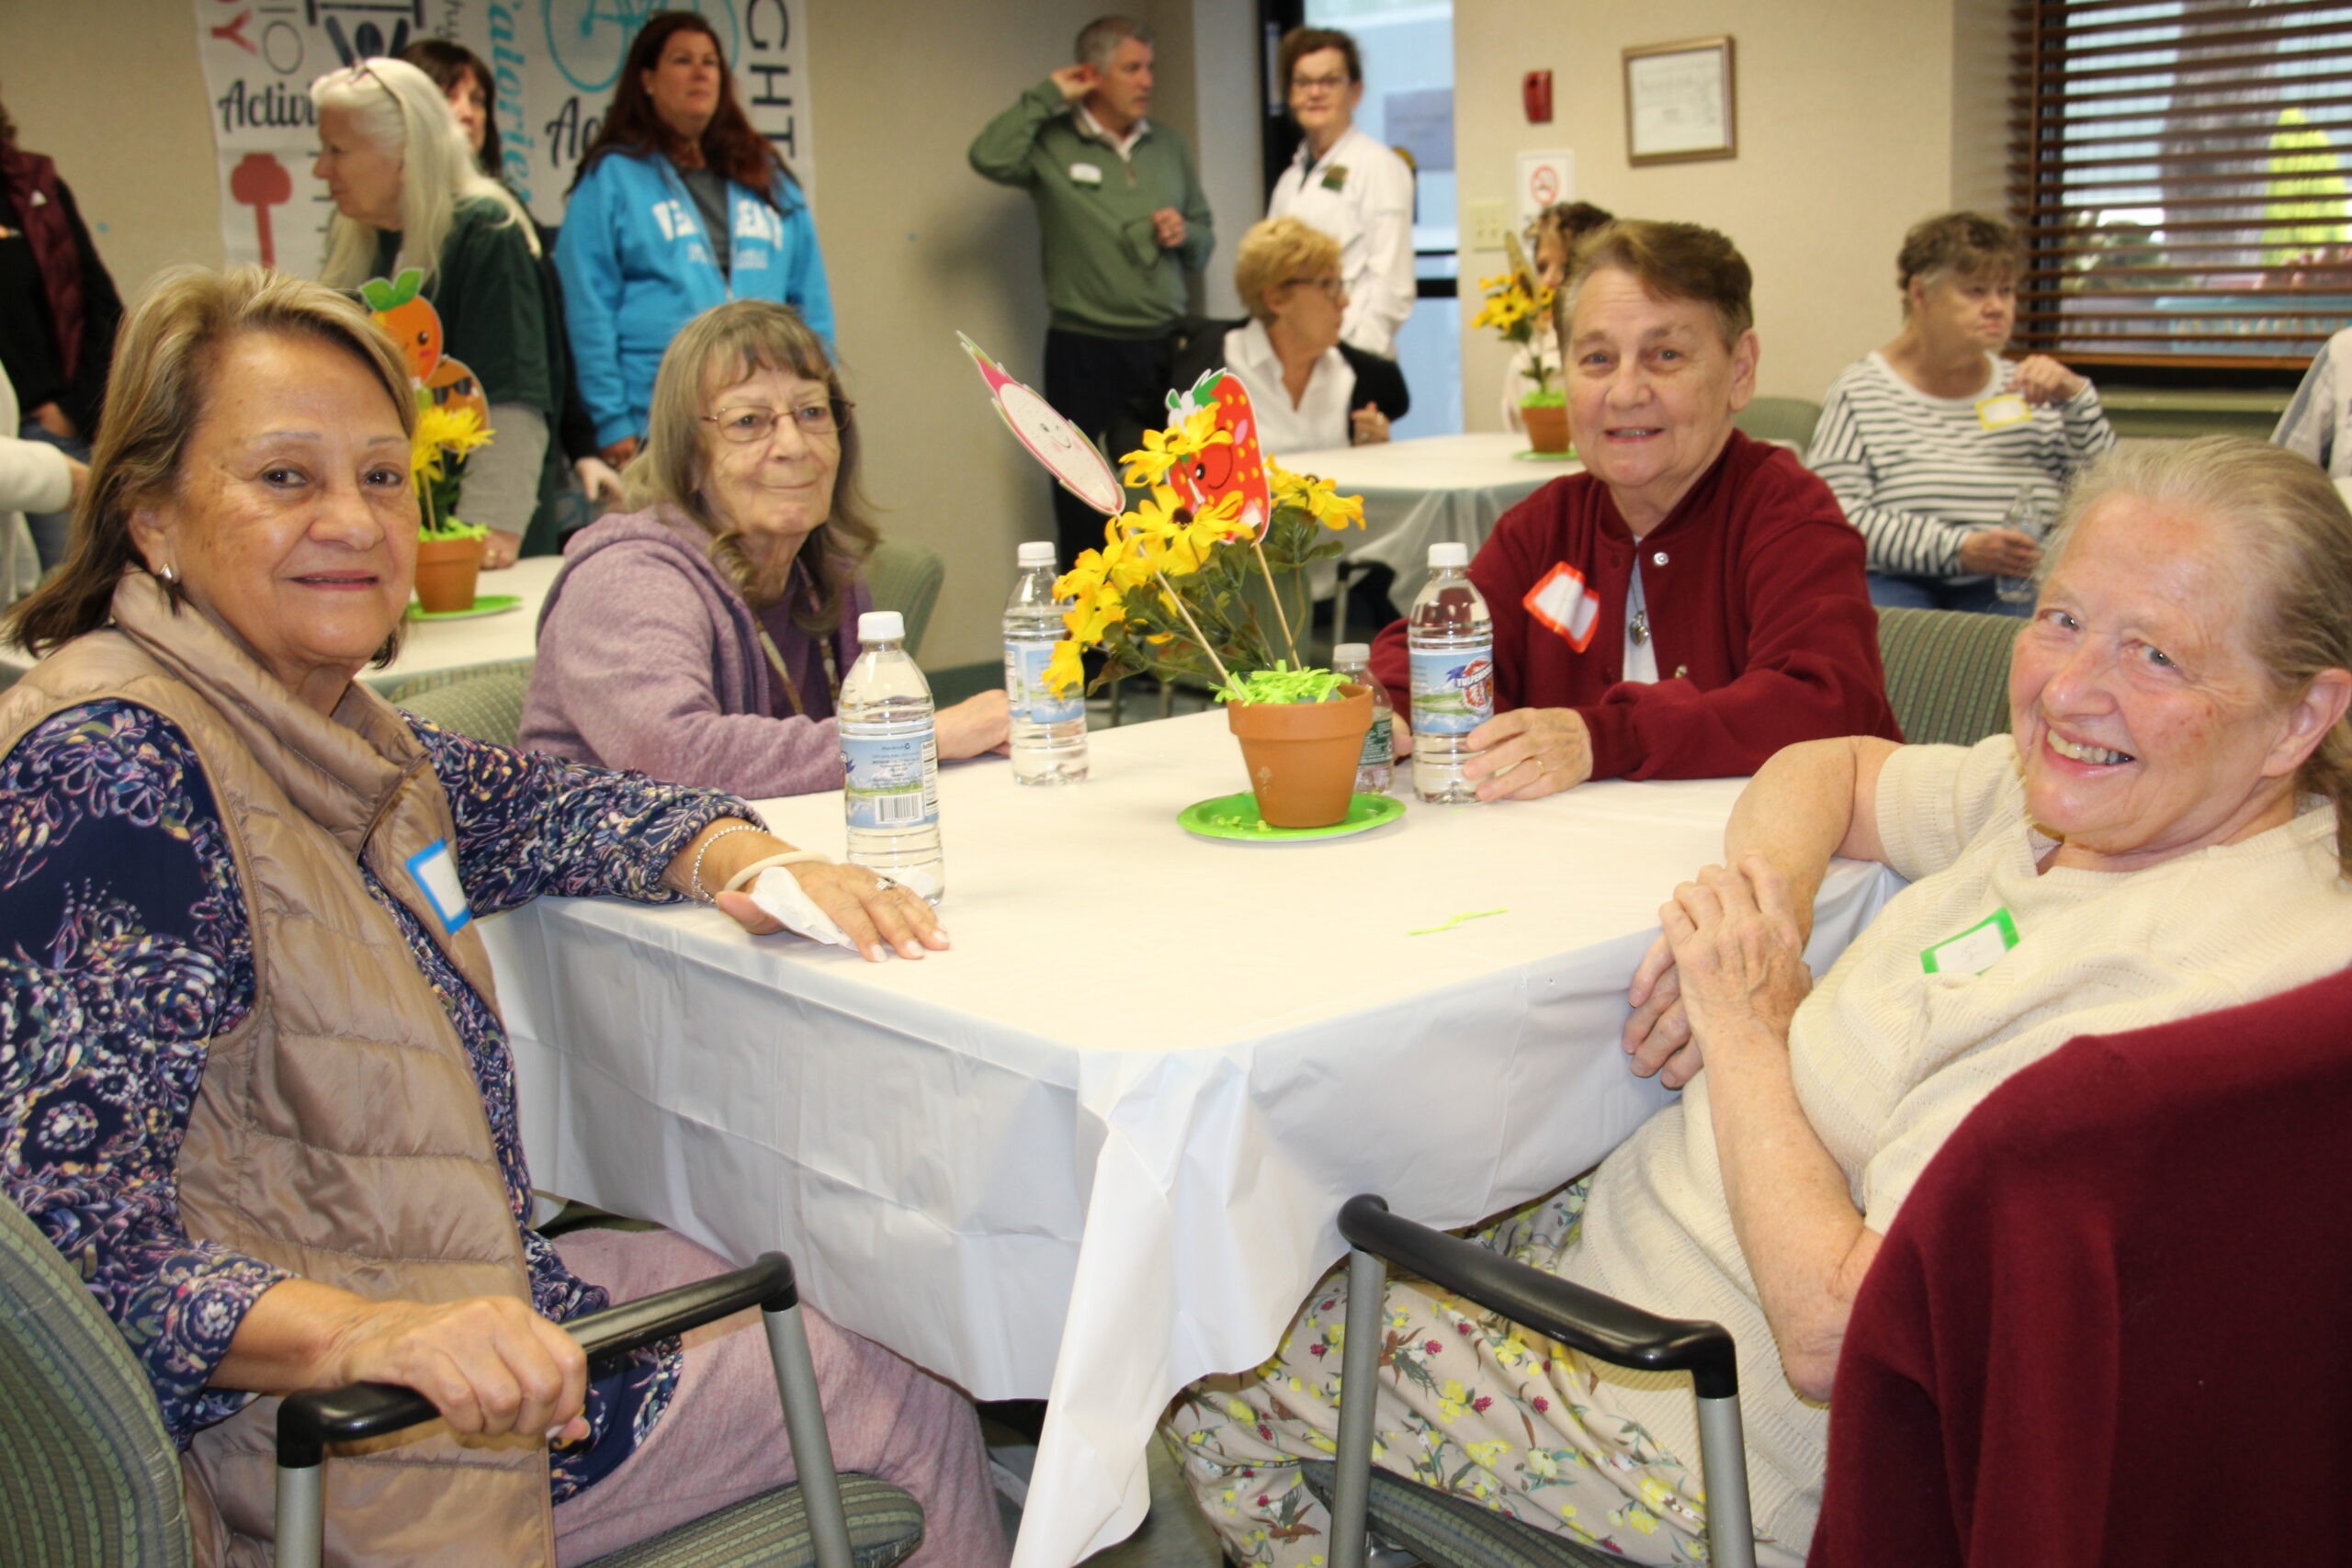 A group of seniors sitting around a table indoors, smiling and posing for a photo.